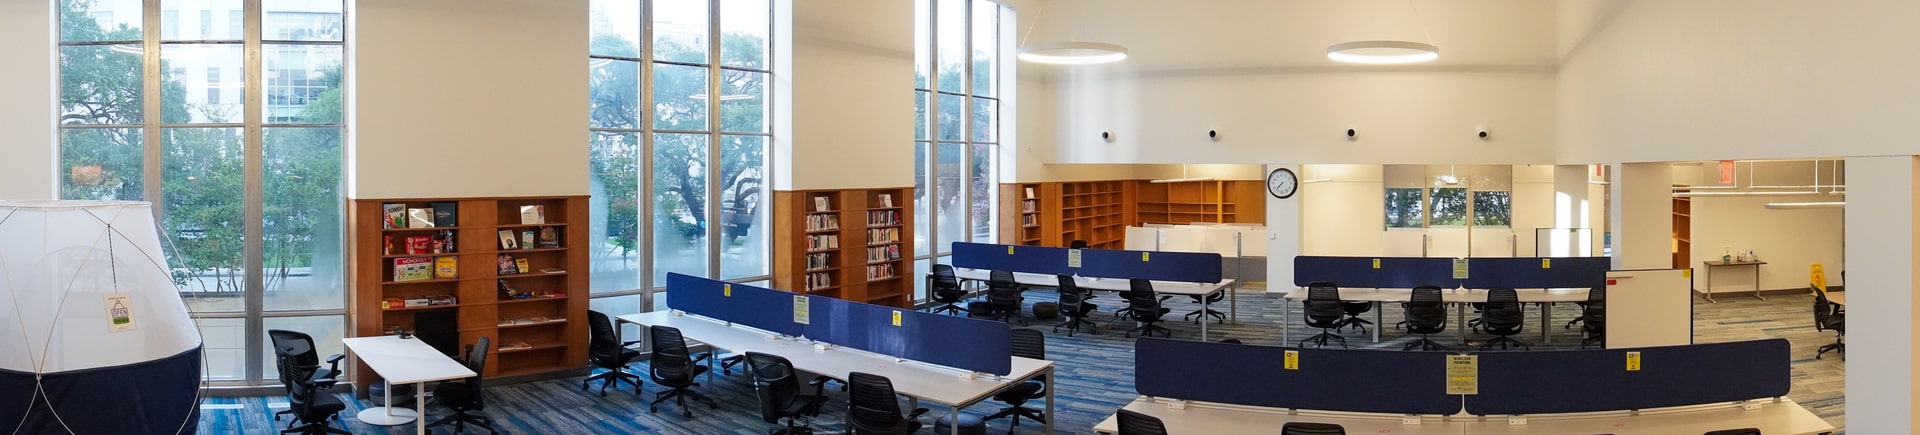 library study space